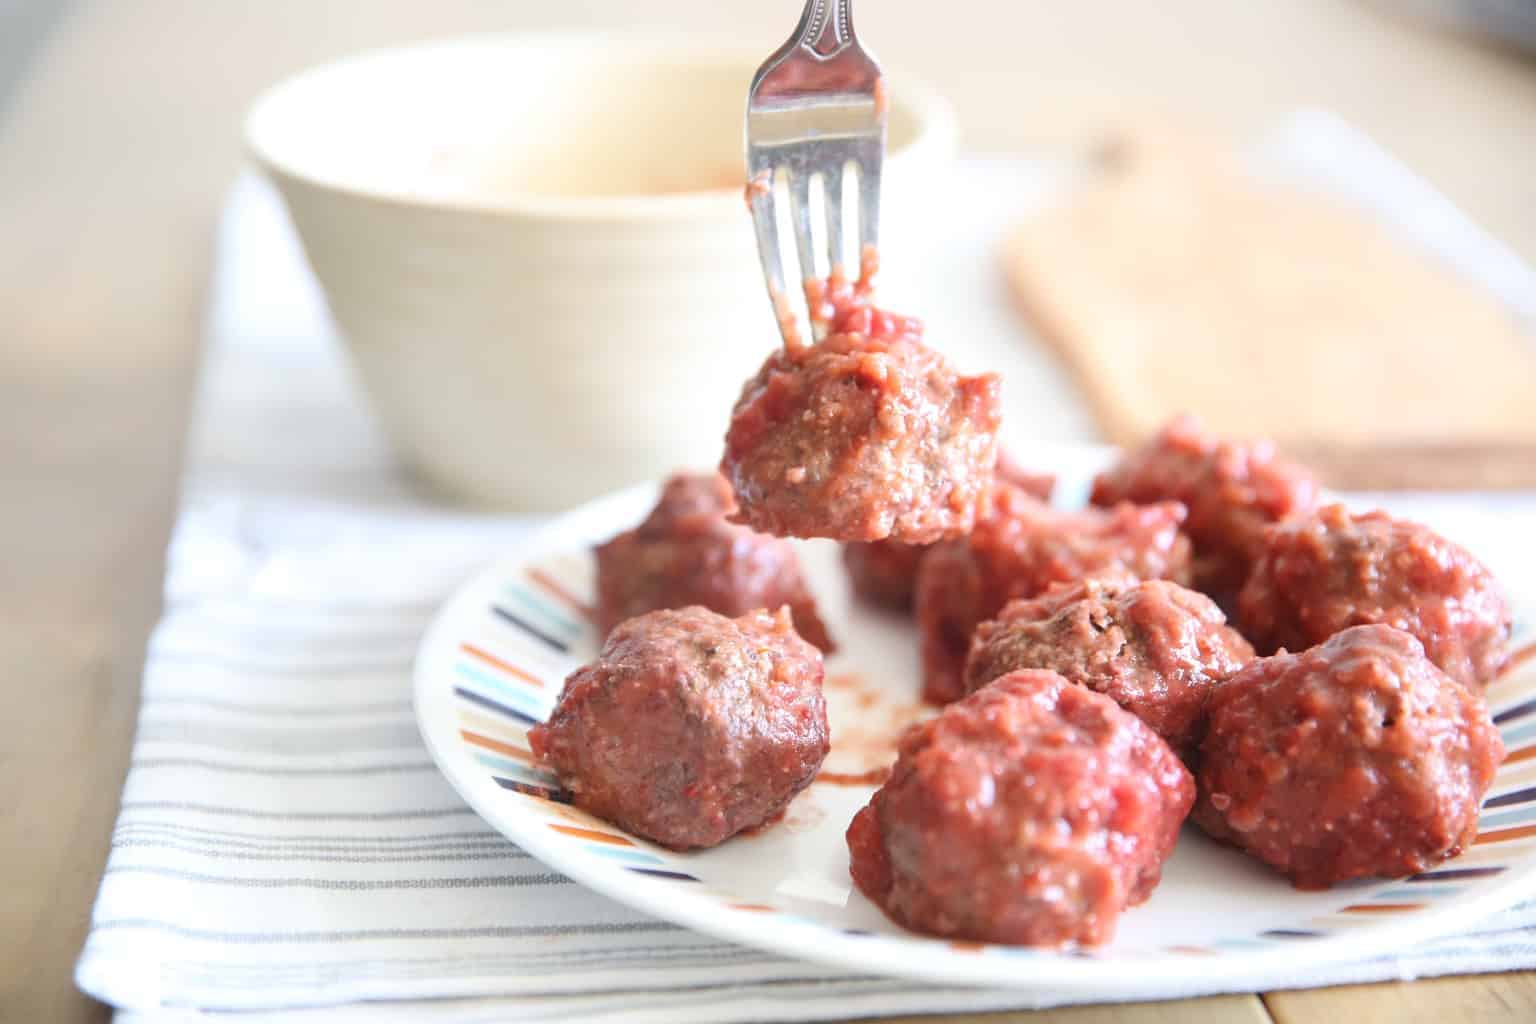 Paleo Meatballs With Cranberry Chili Sauce Appetizer Our Oily House